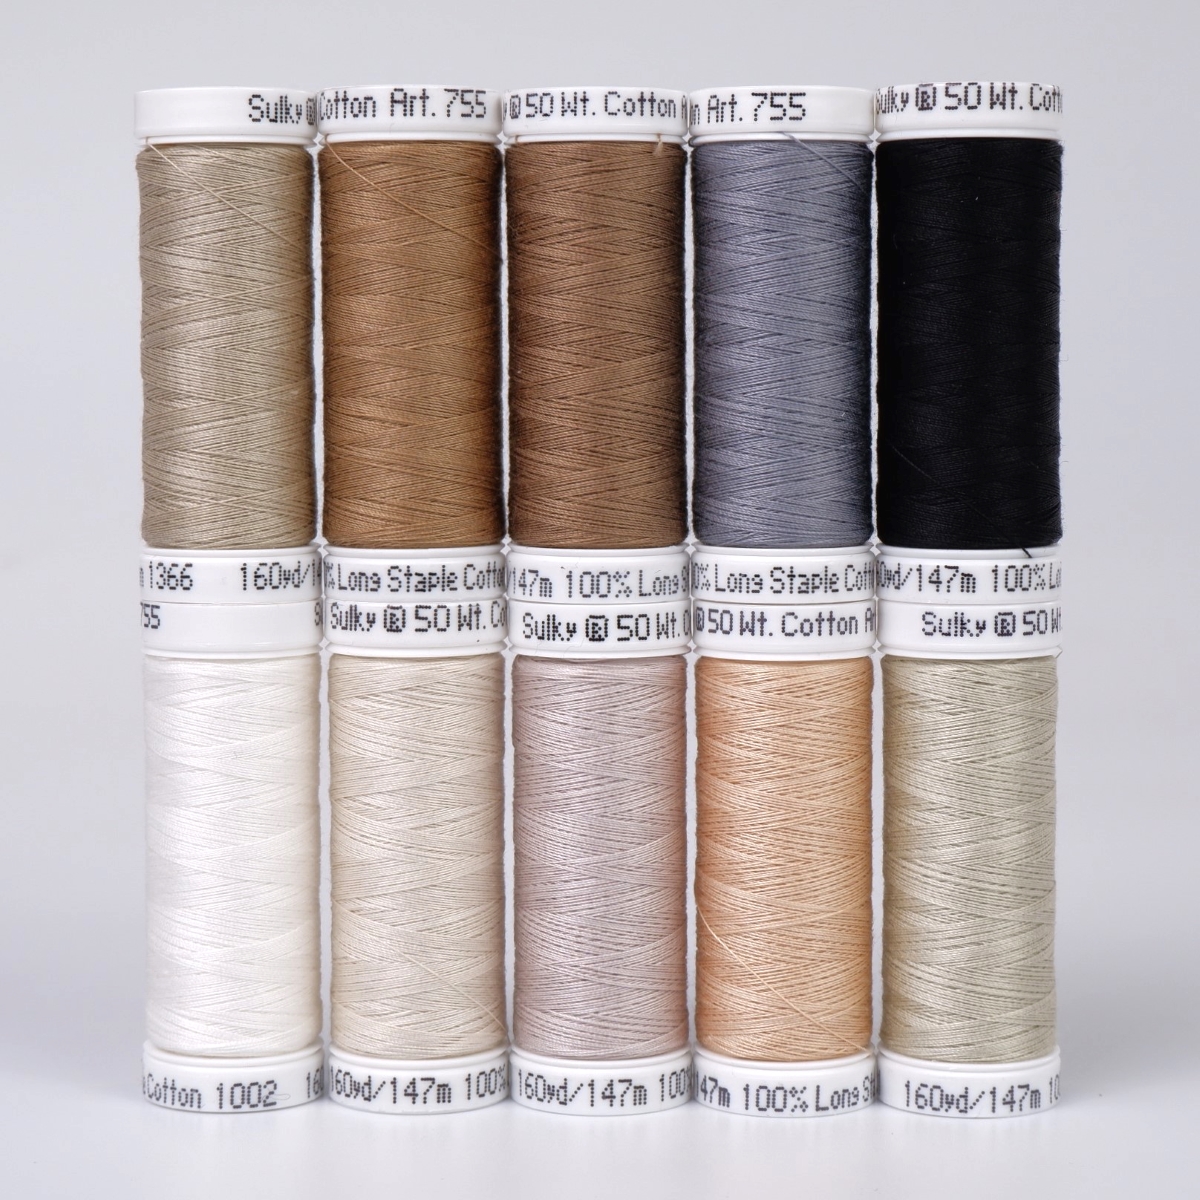 SULKY COTTON 50 - NEUTRALS AND
NUTSHELLS (10x 147m Snap Spools)